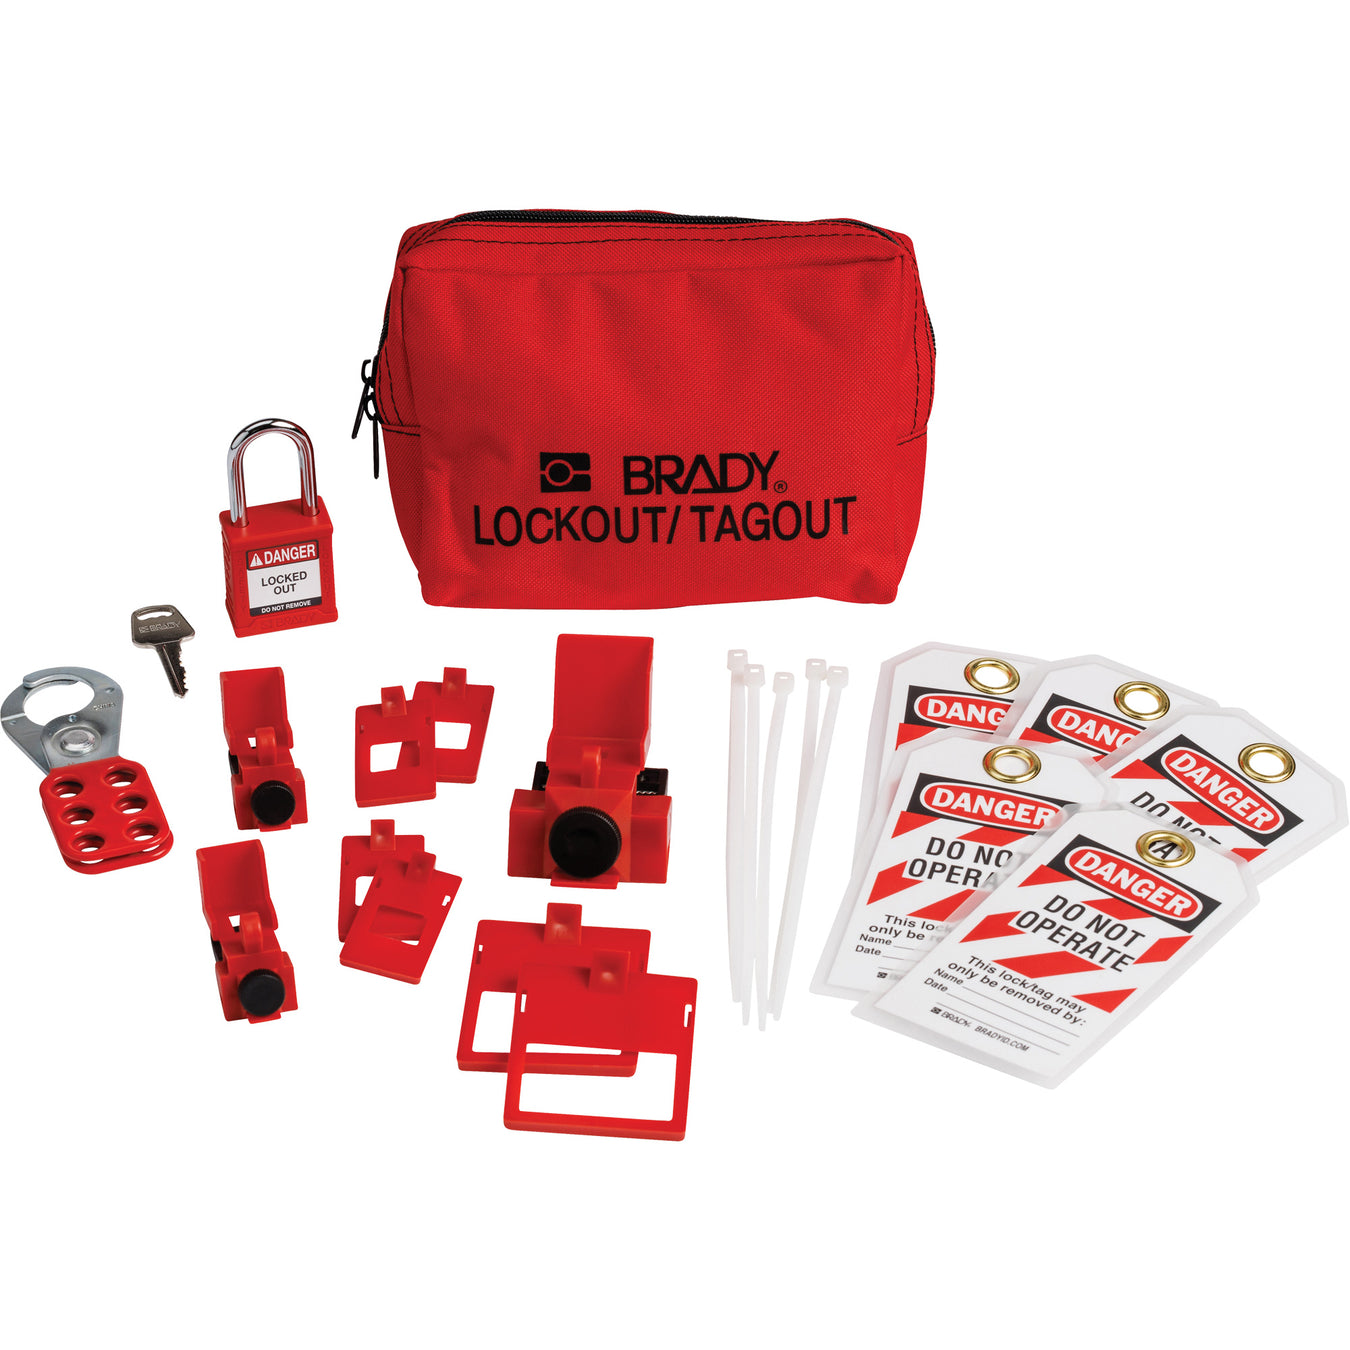 Electrical Lockout Tagout Kit with Nylon Safety Padlock in Pouch